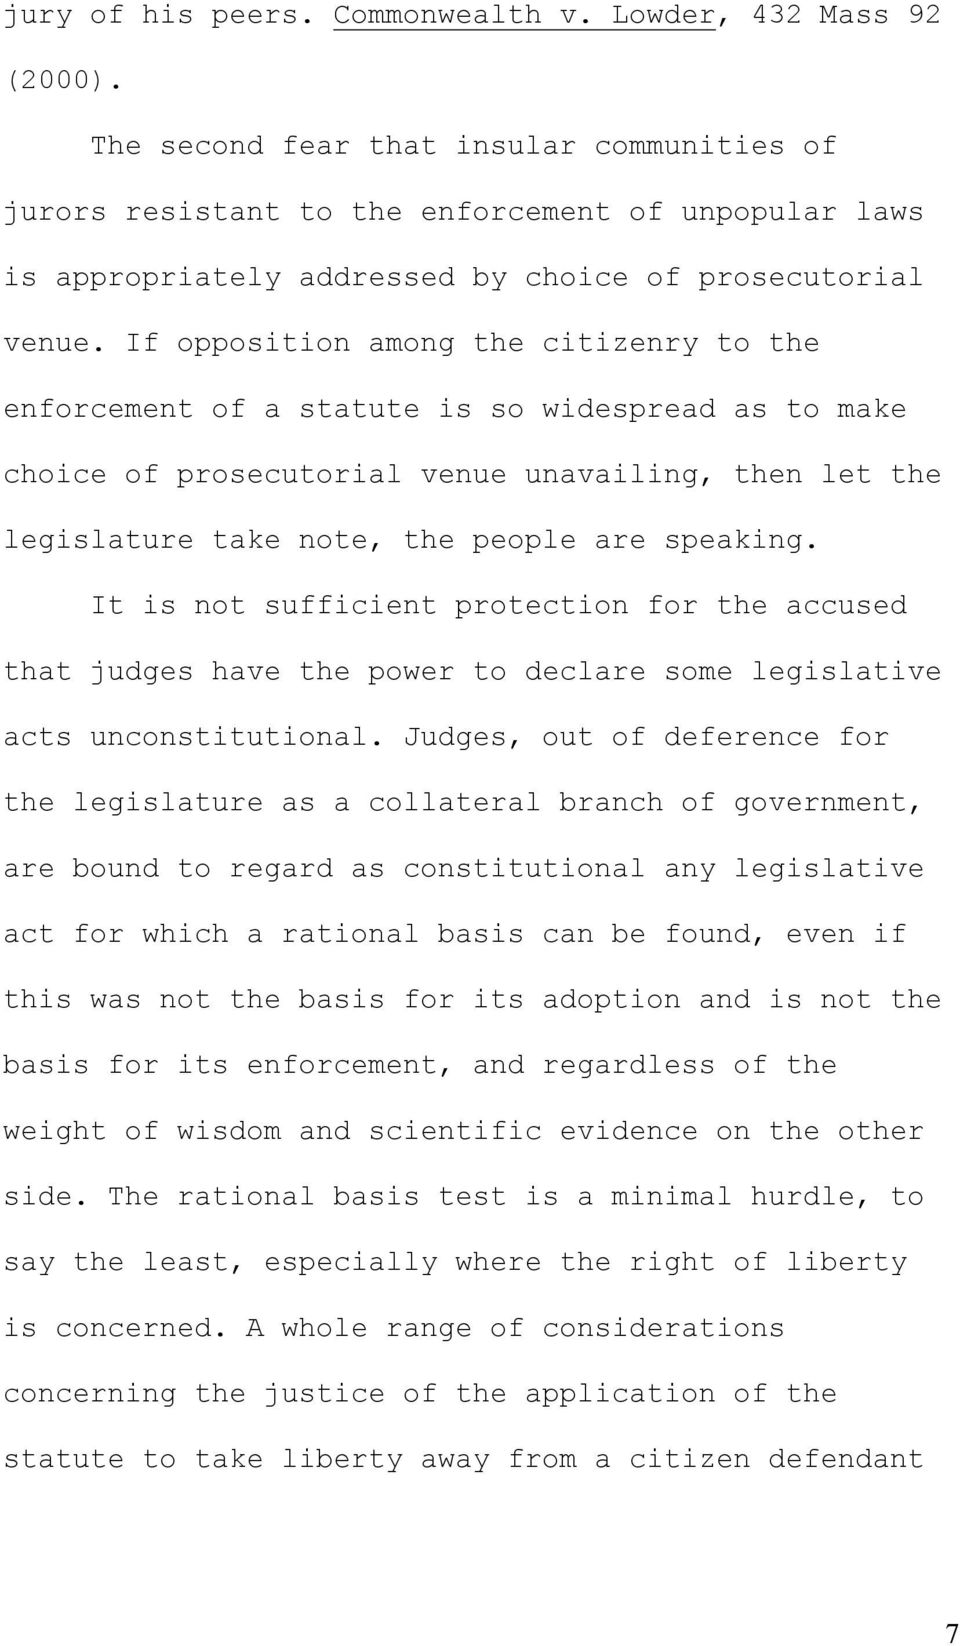 If opposition among the citizenry to the enforcement of a statute is so widespread as to make choice of prosecutorial venue unavailing, then let the legislature take note, the people are speaking.